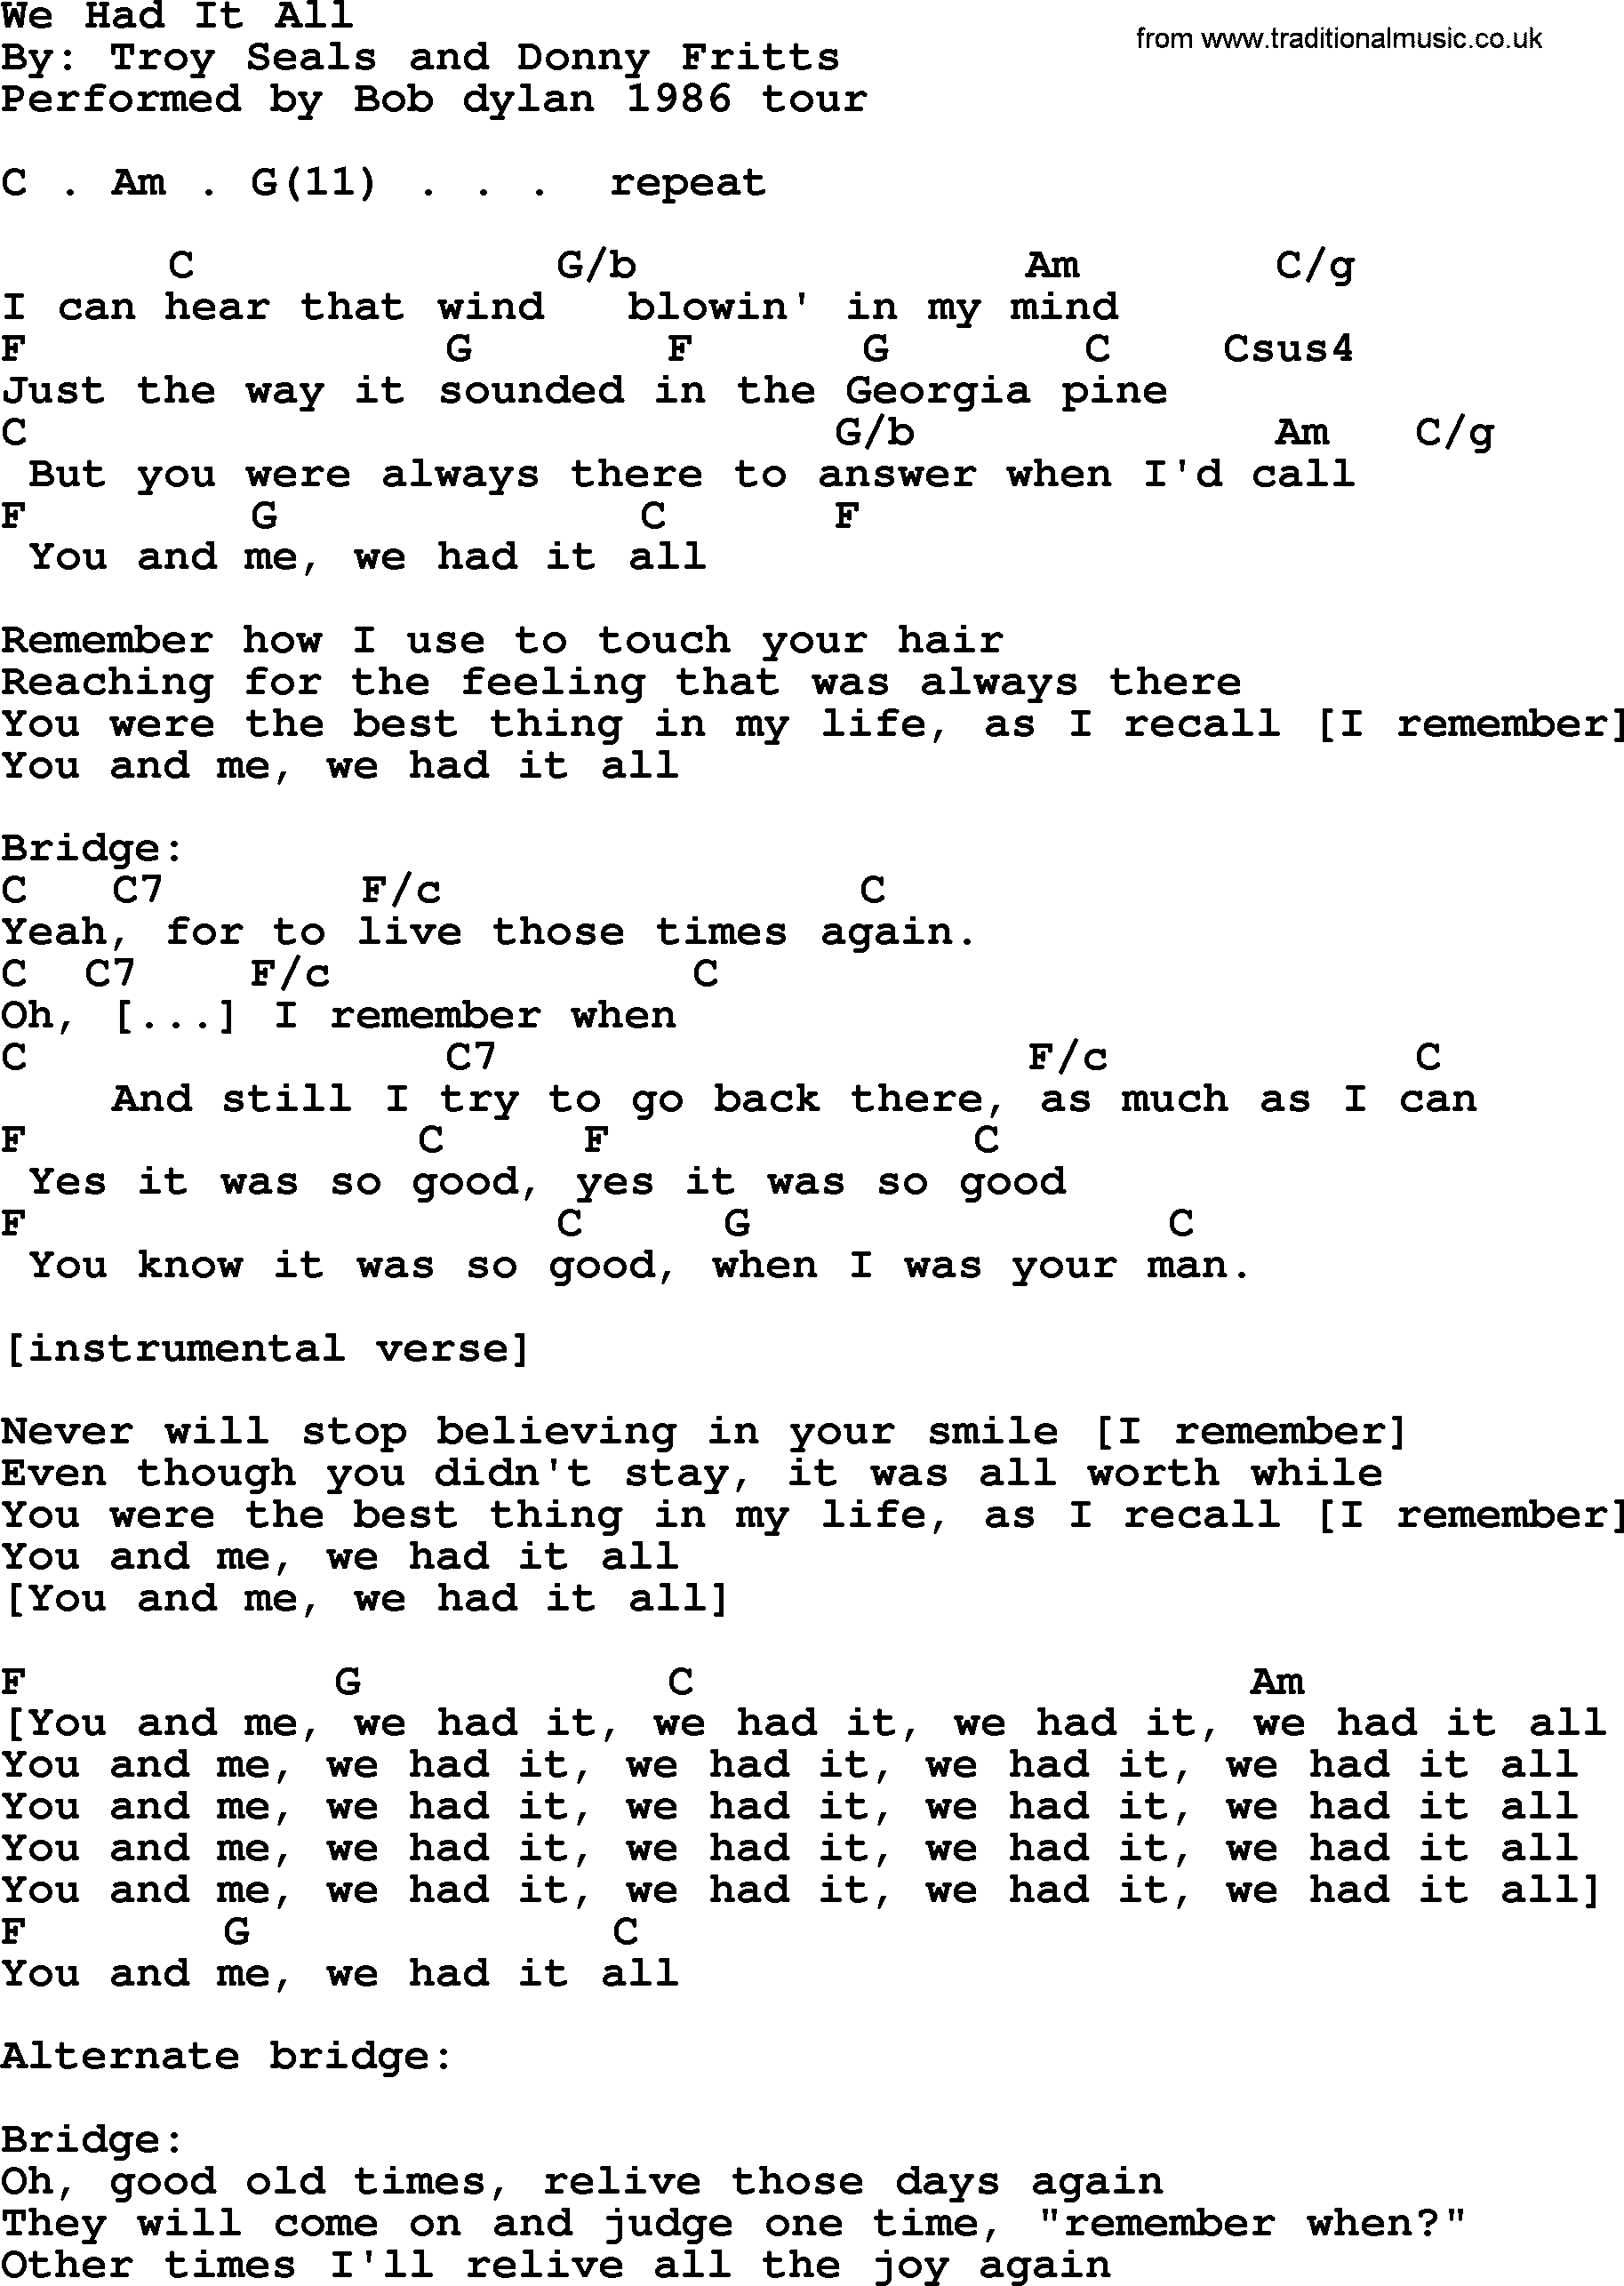 Bob Dylan song, lyrics with chords - We Had It All